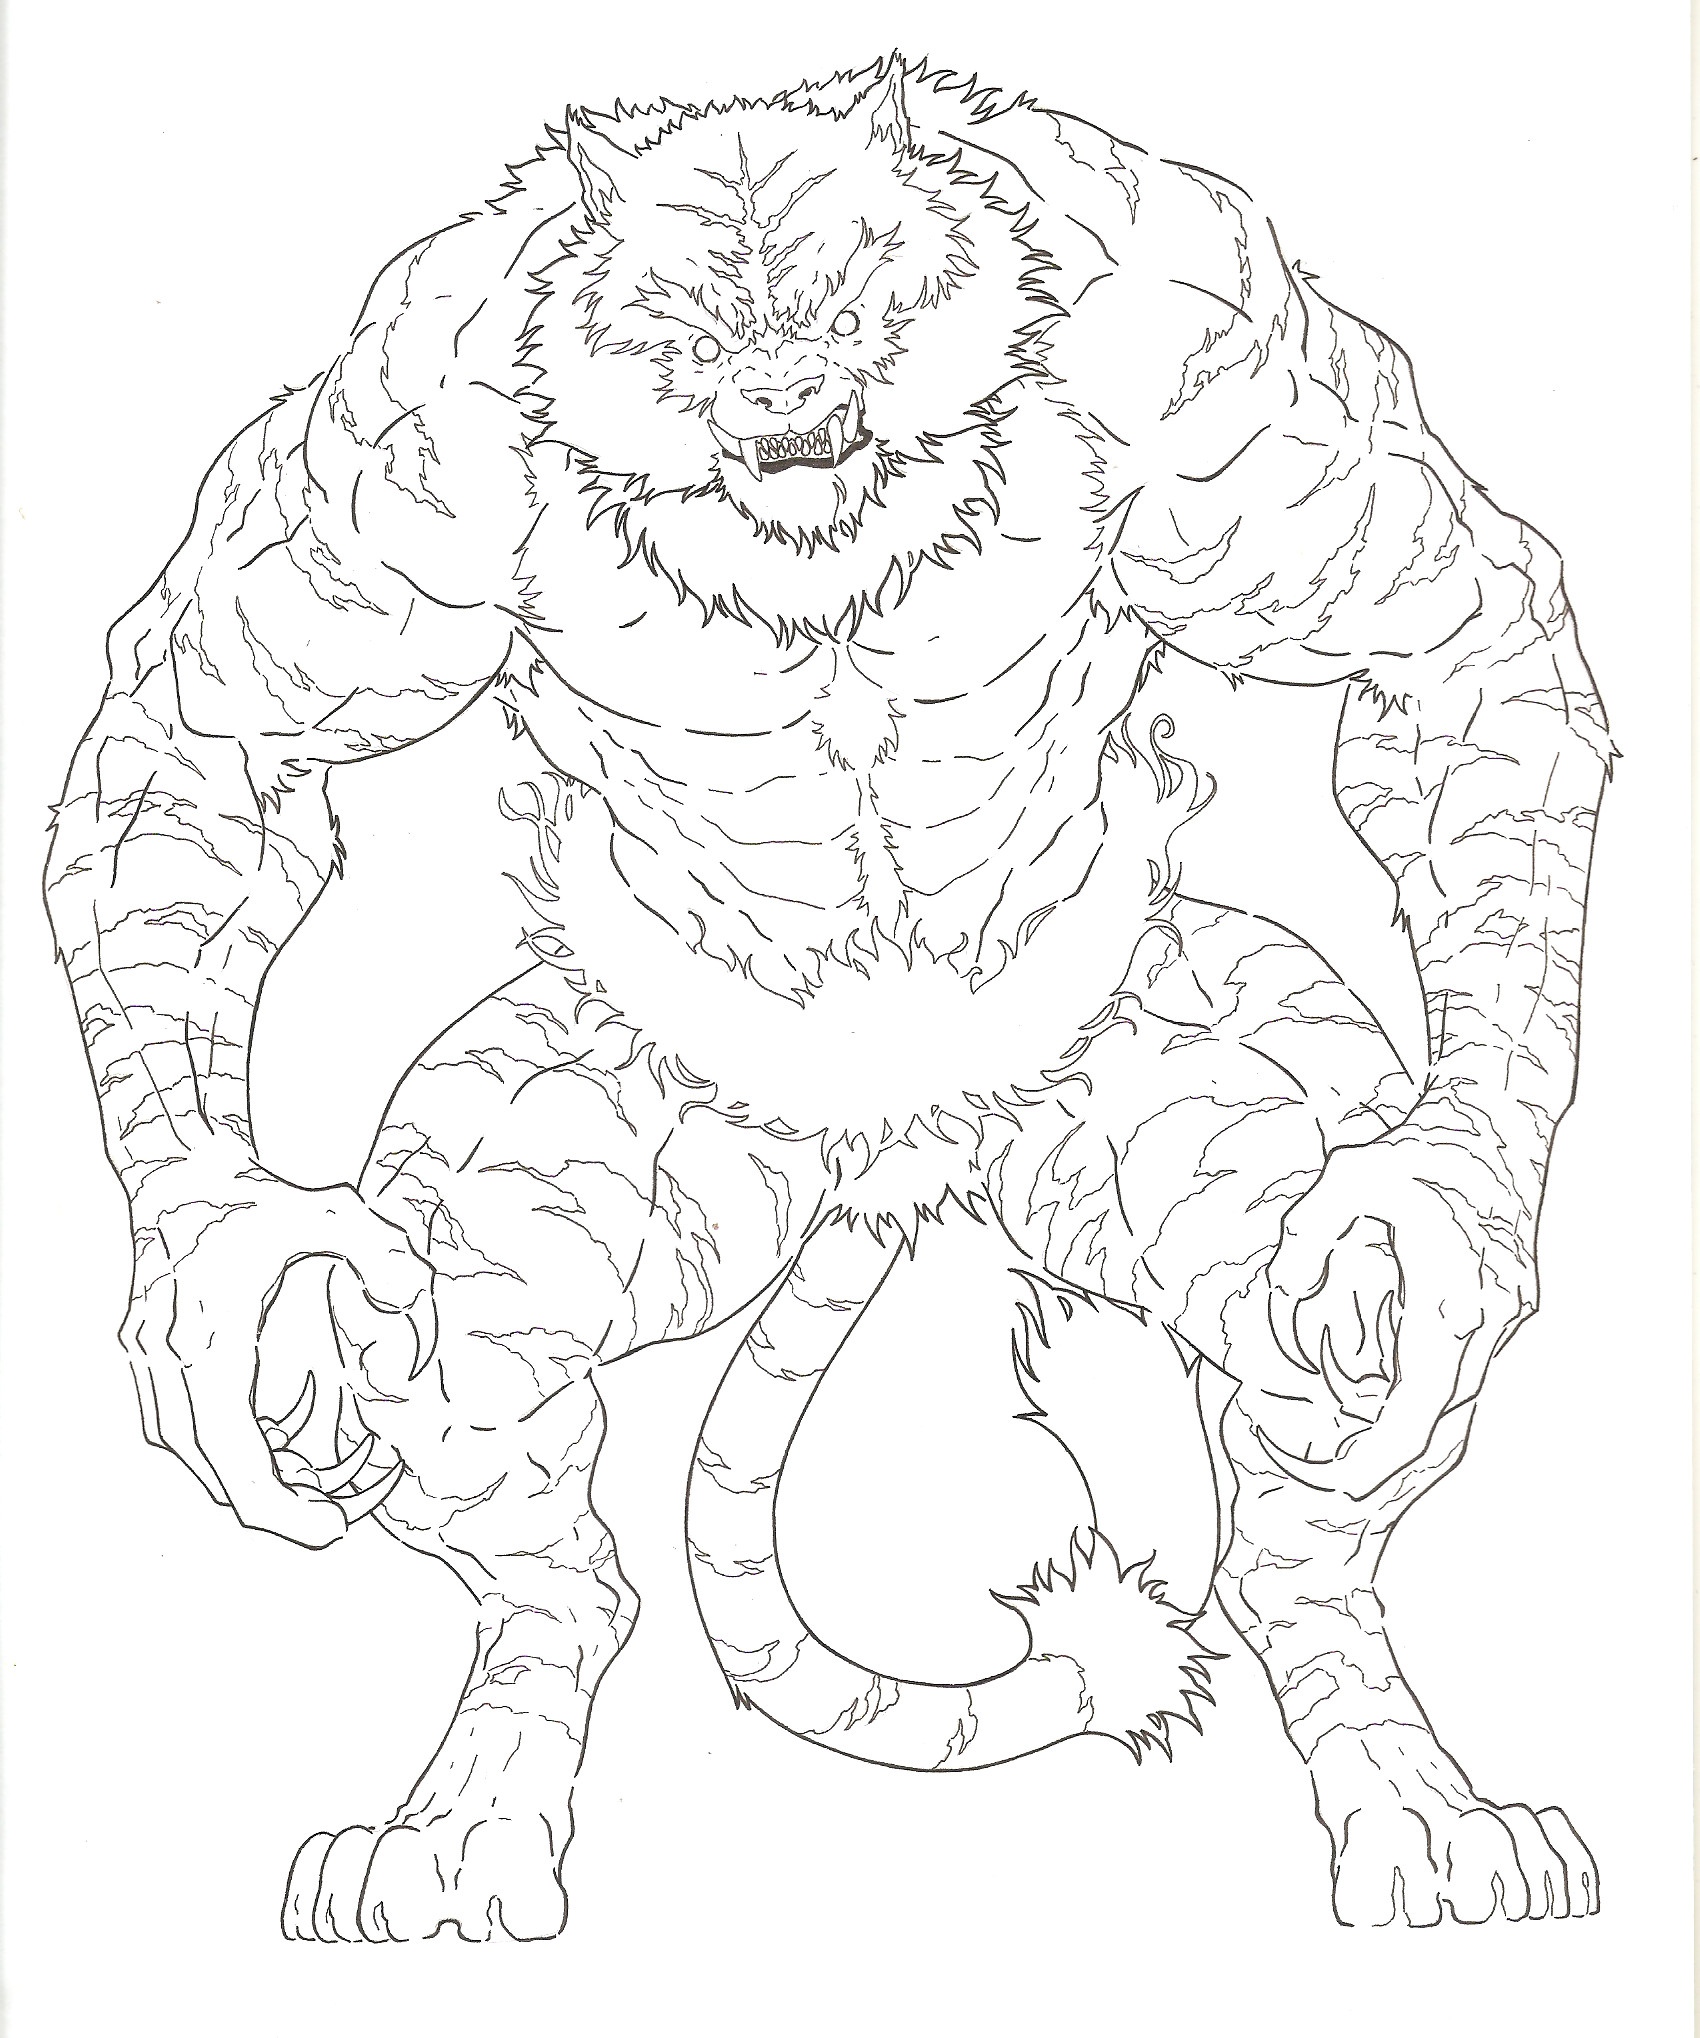 Incineroar Pokemon Sun and Moon Coloring Pages (Page 1) - Line.17QQ.com